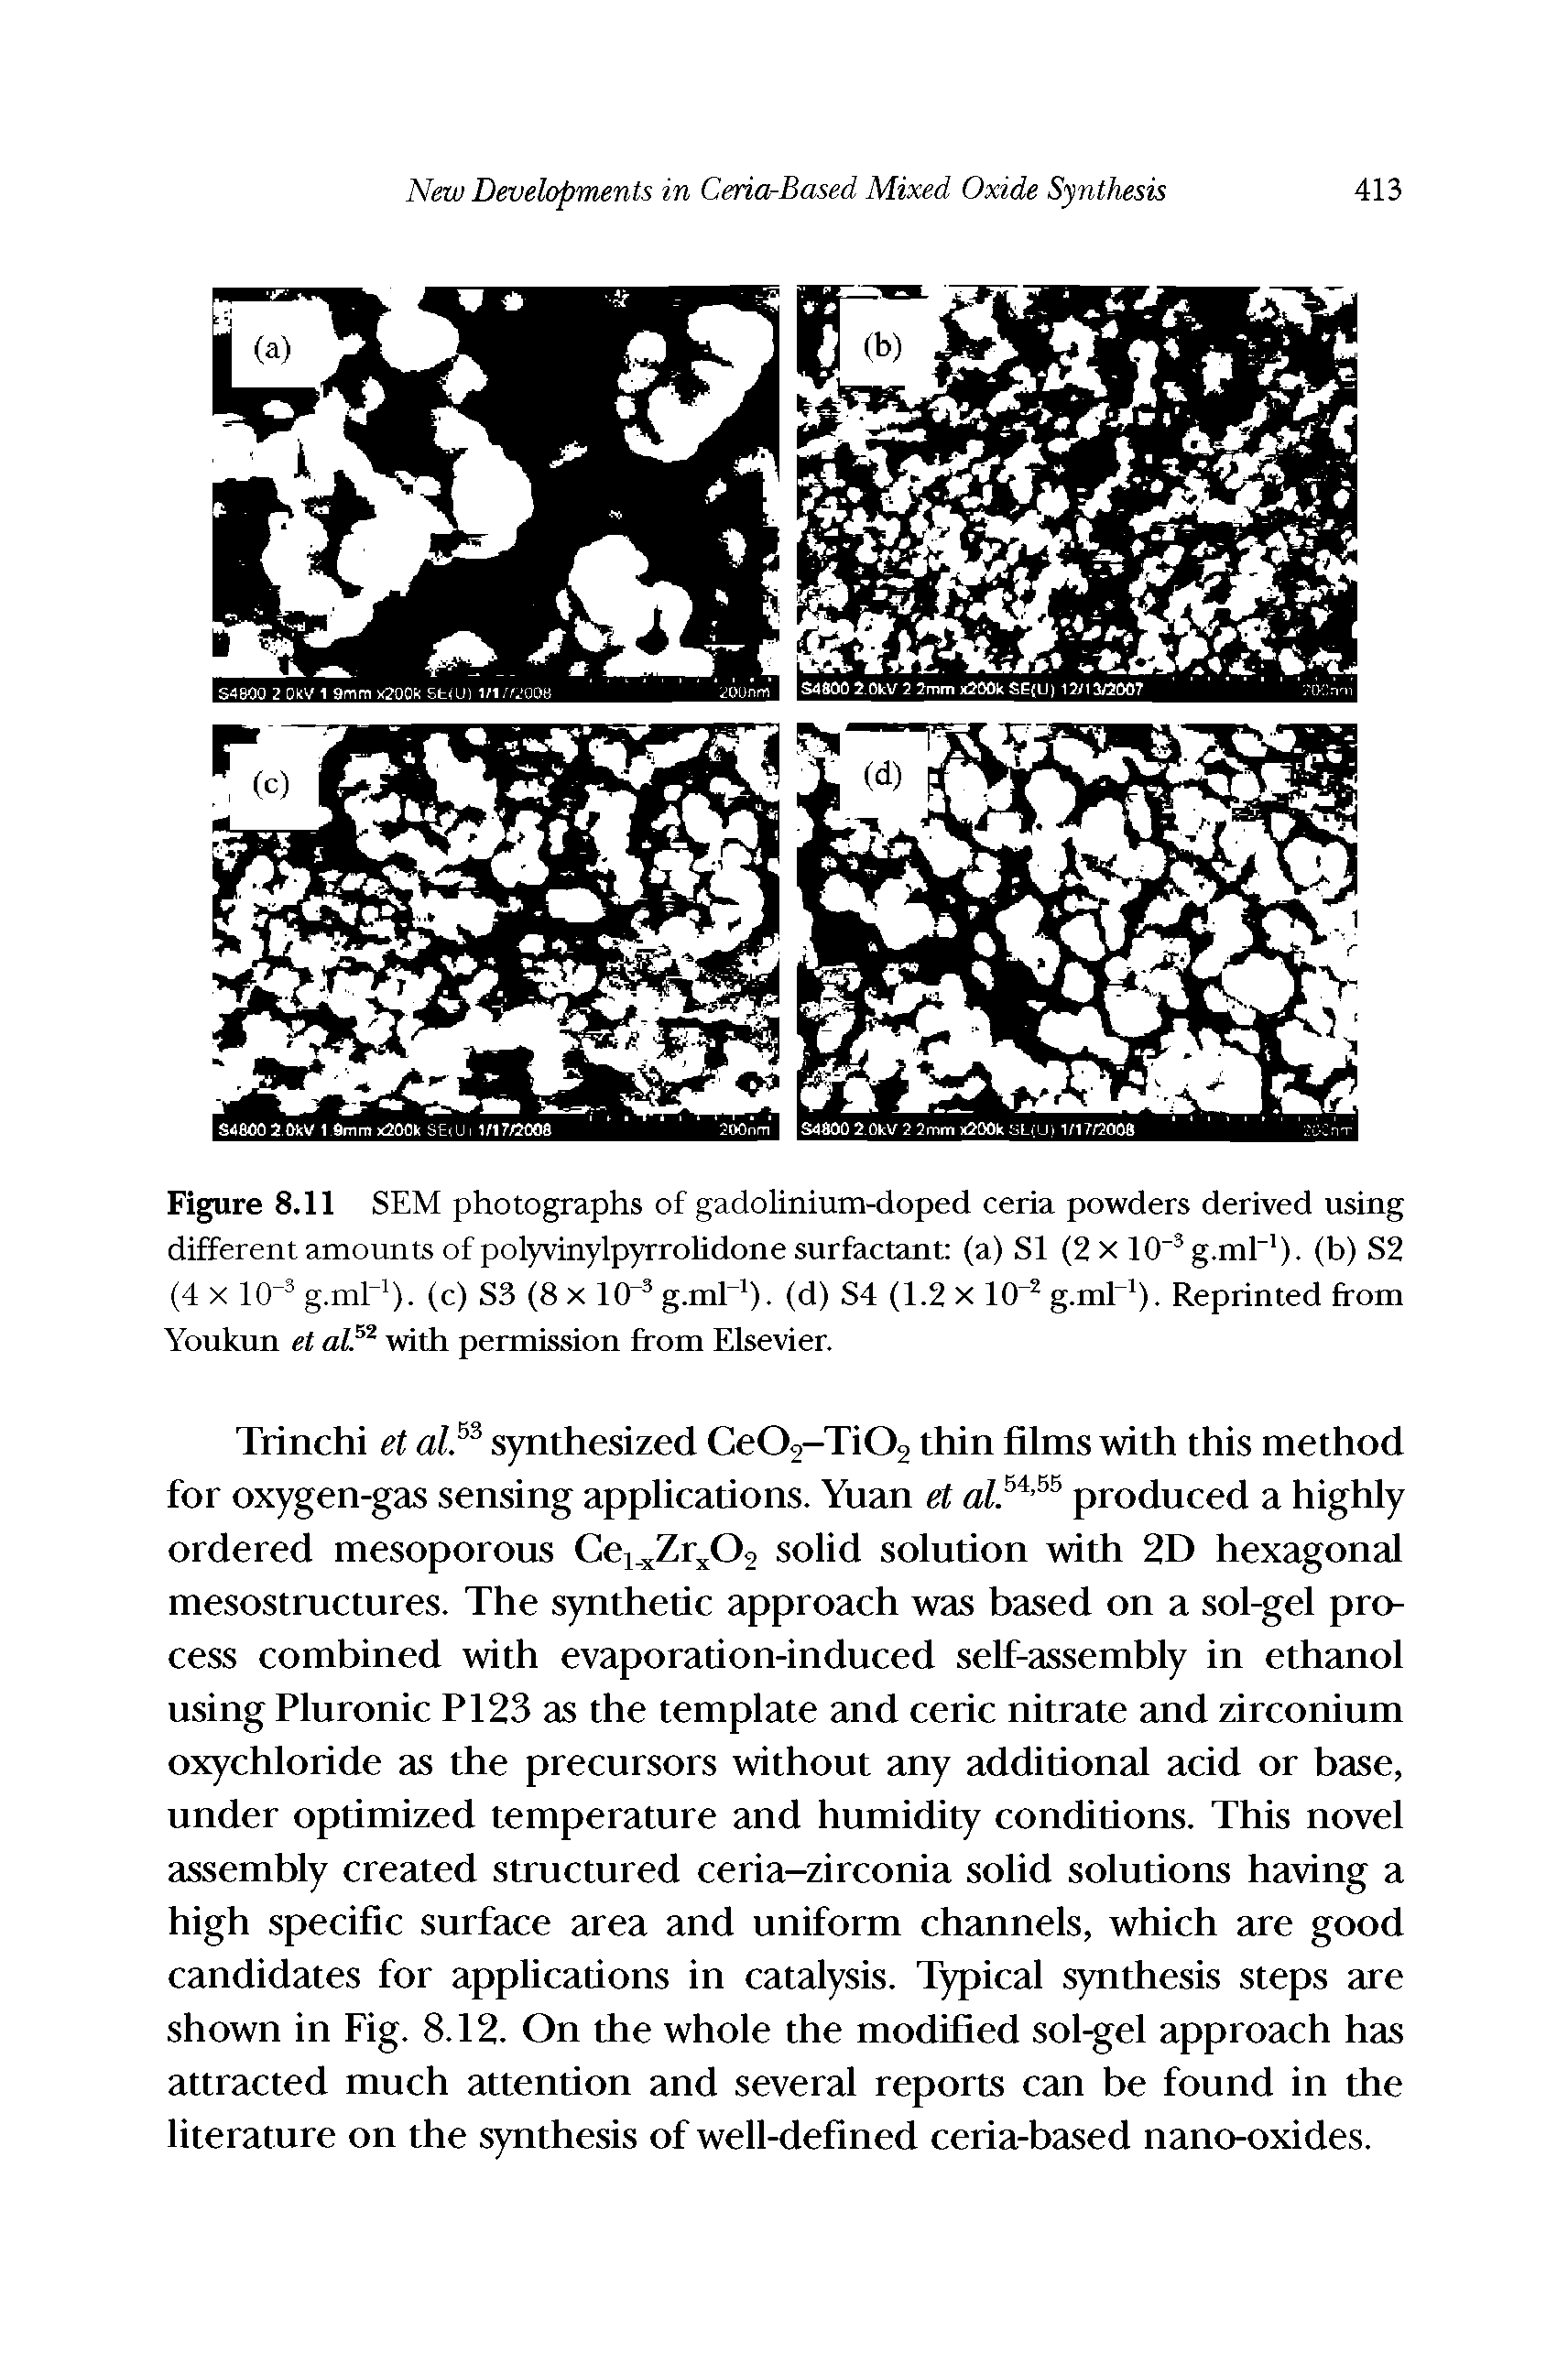 Figure 8.11 SEM photographs of gadolinium-doped ceria powders derived using different amounts of polyvinylpyrrolidone surfactant (a) SI (2 x 10" g-ml ). (b) S2 (4 X 10 g.ml ). (c) S3 (8 x KT g.ml ). (d) S4 (1.2 x 10 g.ml ). Reprinted from Youkun et alP with permission from Elsevier.